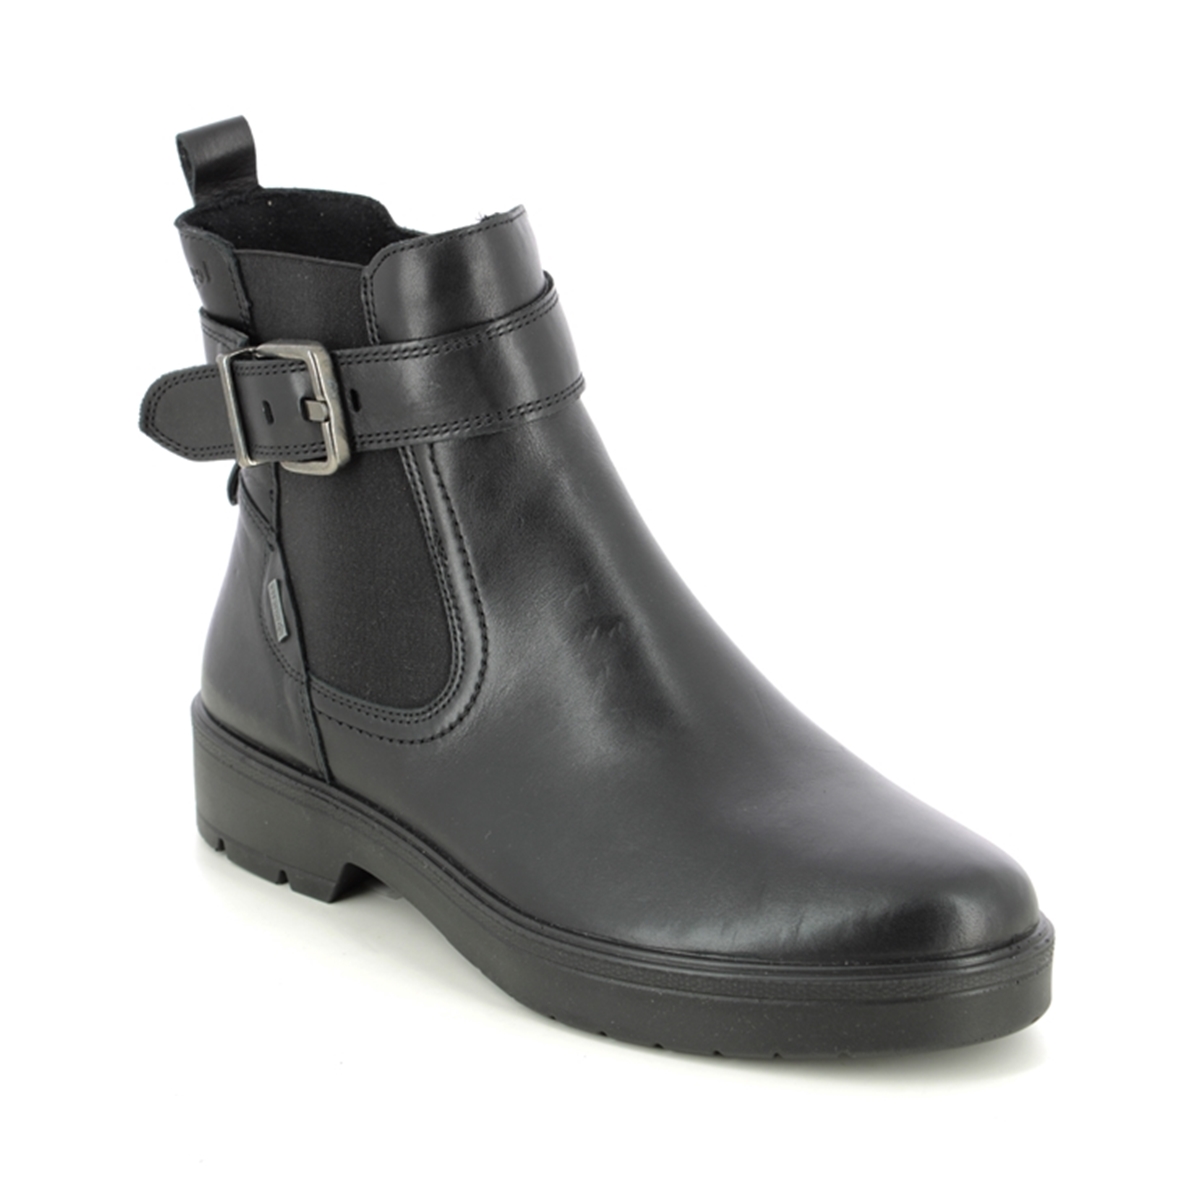 Legero Mystic Gtx Chelsea Black leather Womens Chelsea Boots 2000192-0100 in a Plain Leather in Size 4